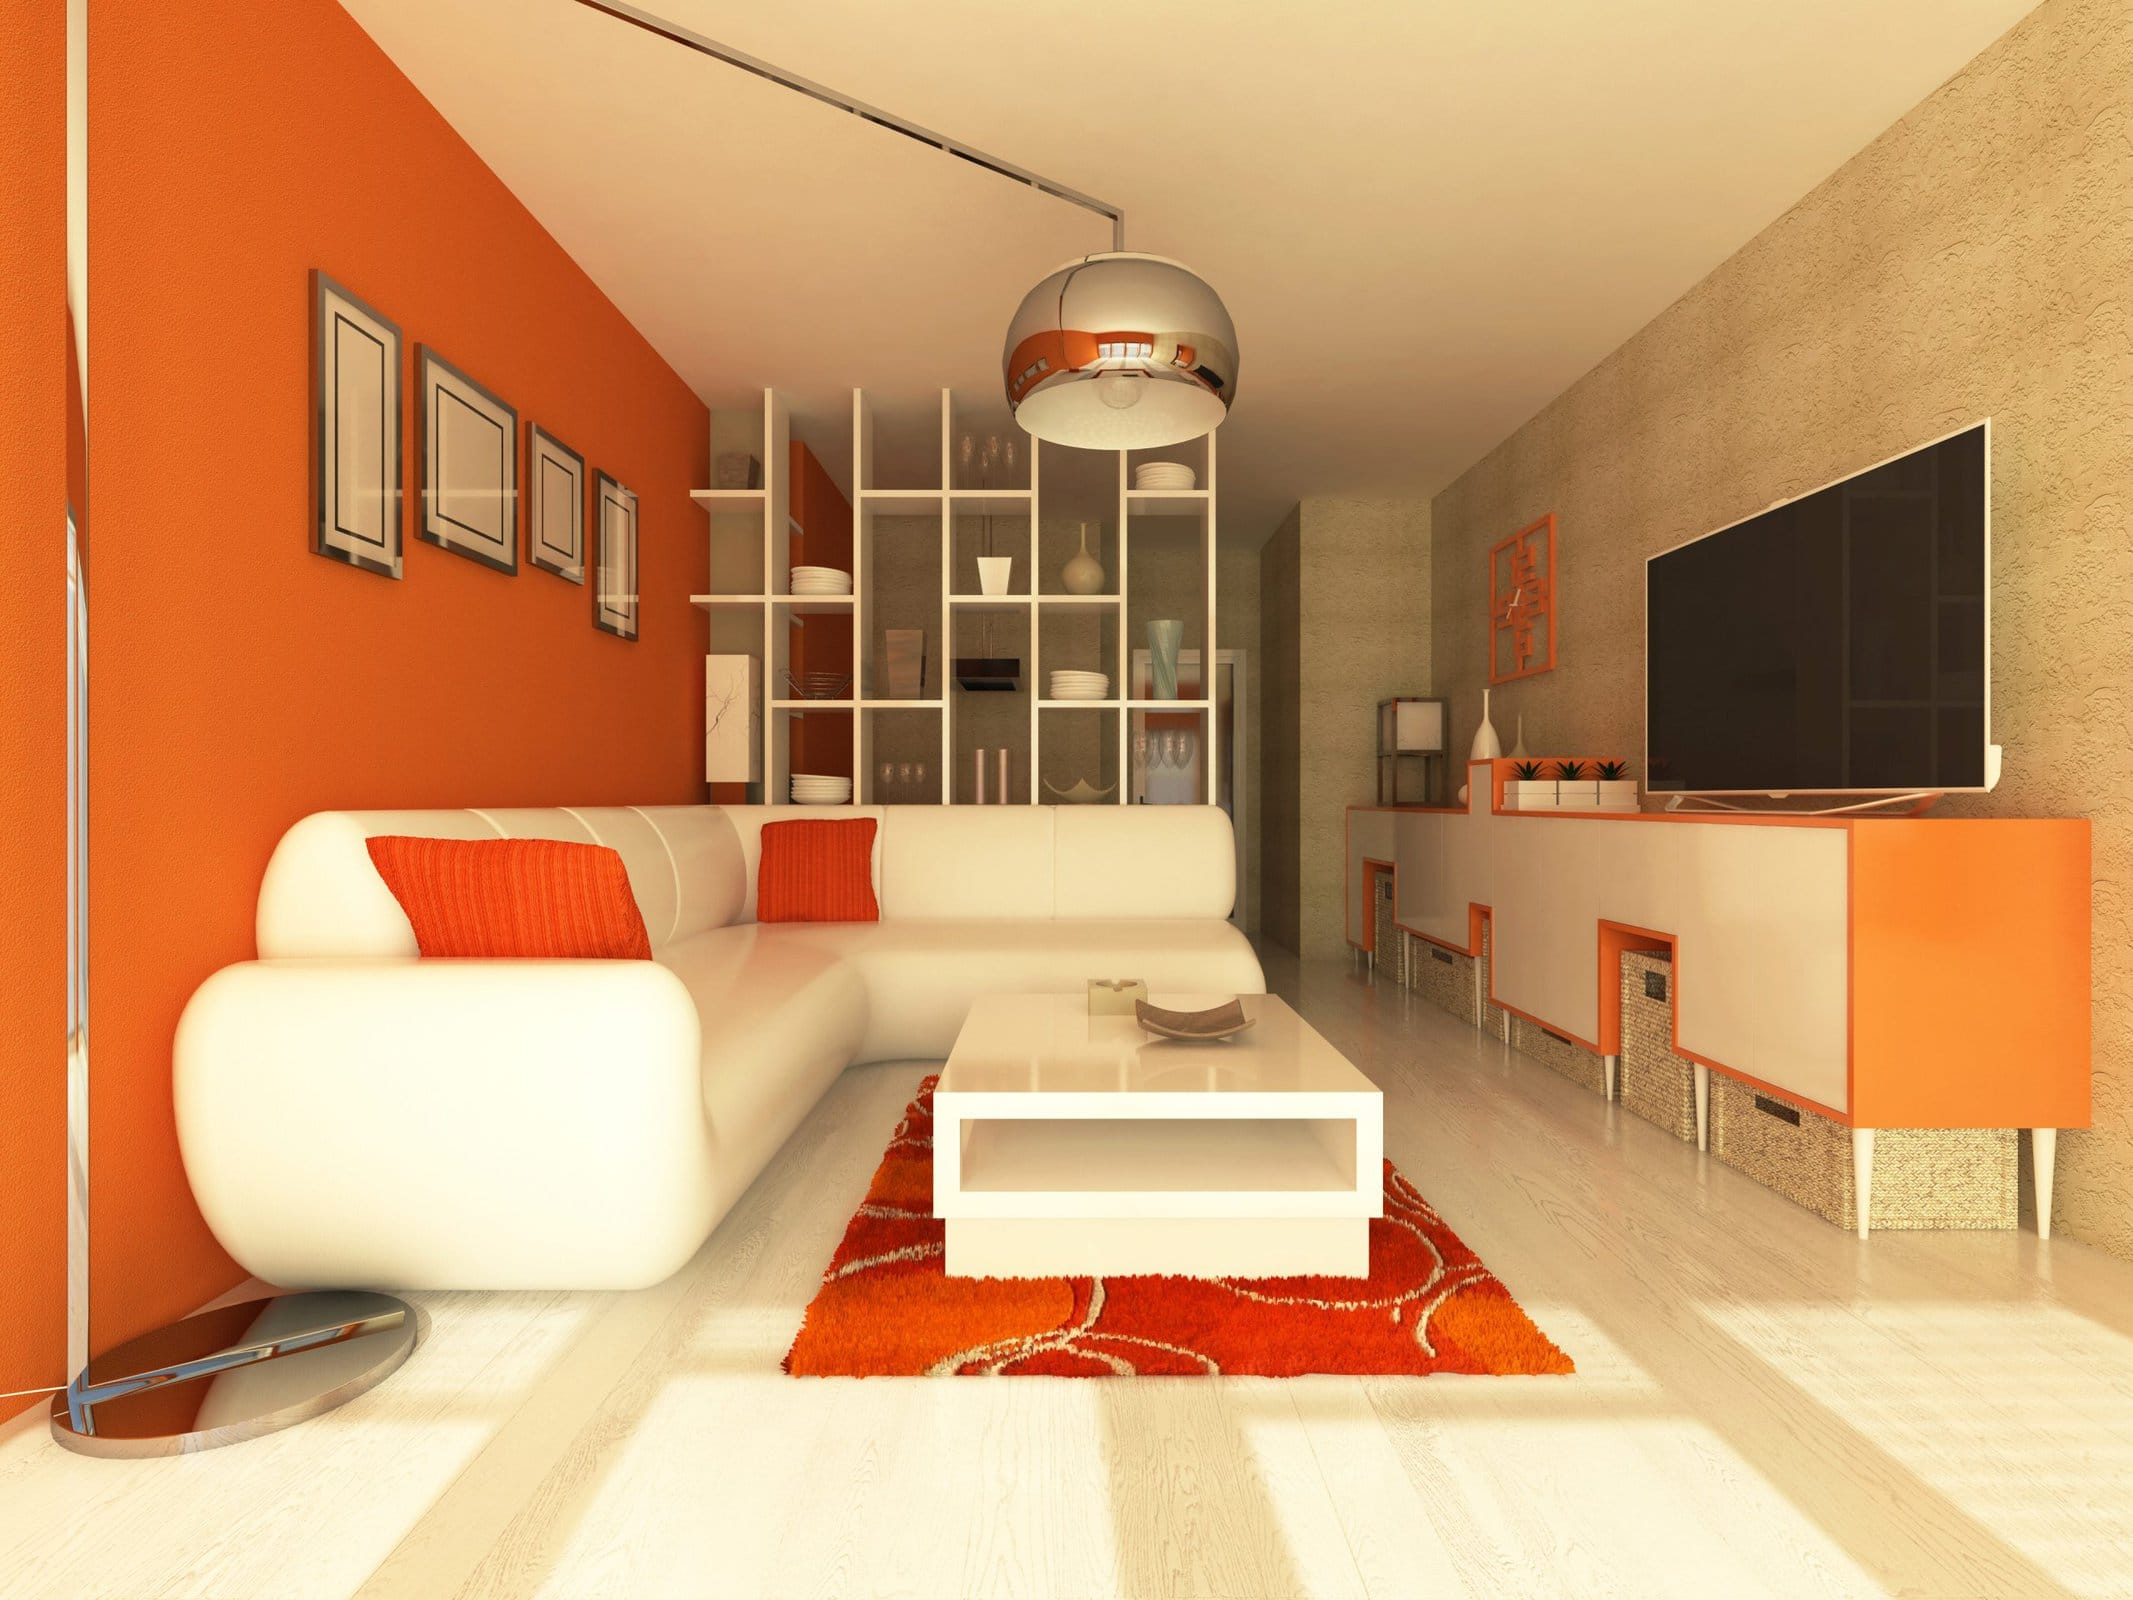  White Is the Easiest Color to Match With Orange Walls scaled